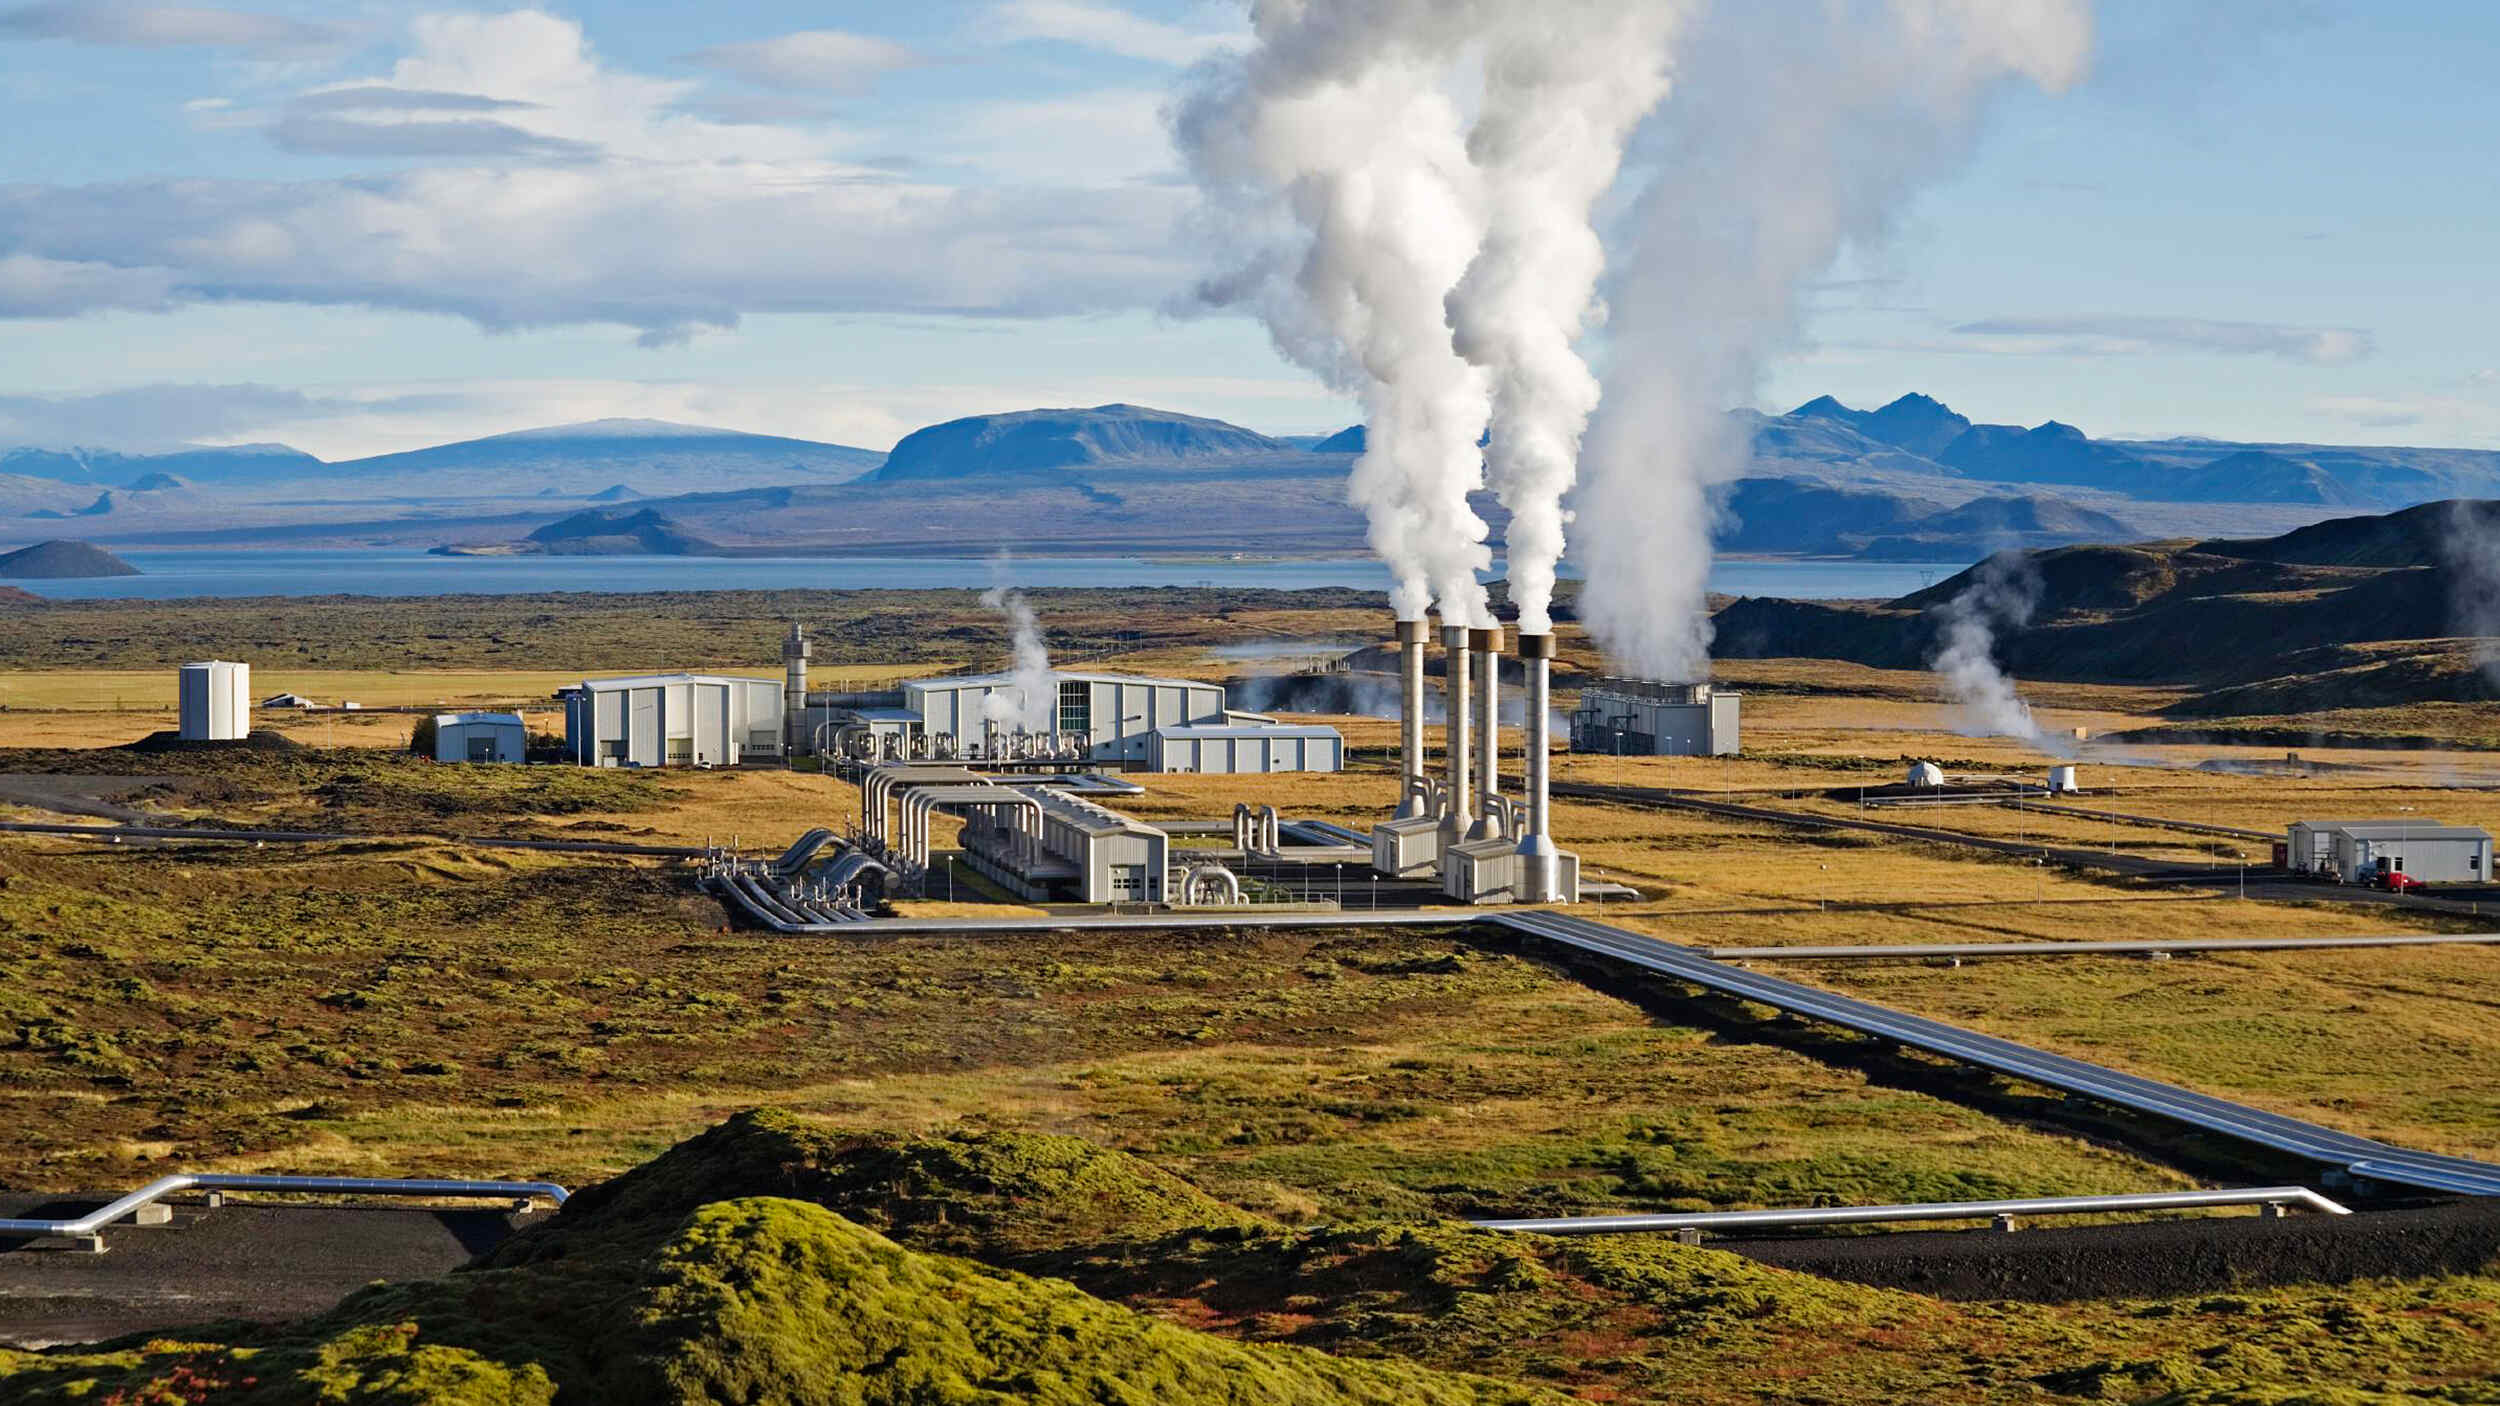 CeraPhi Energy enters into an agreement with Halliburton to advance its Geothermal Energy Aspirations